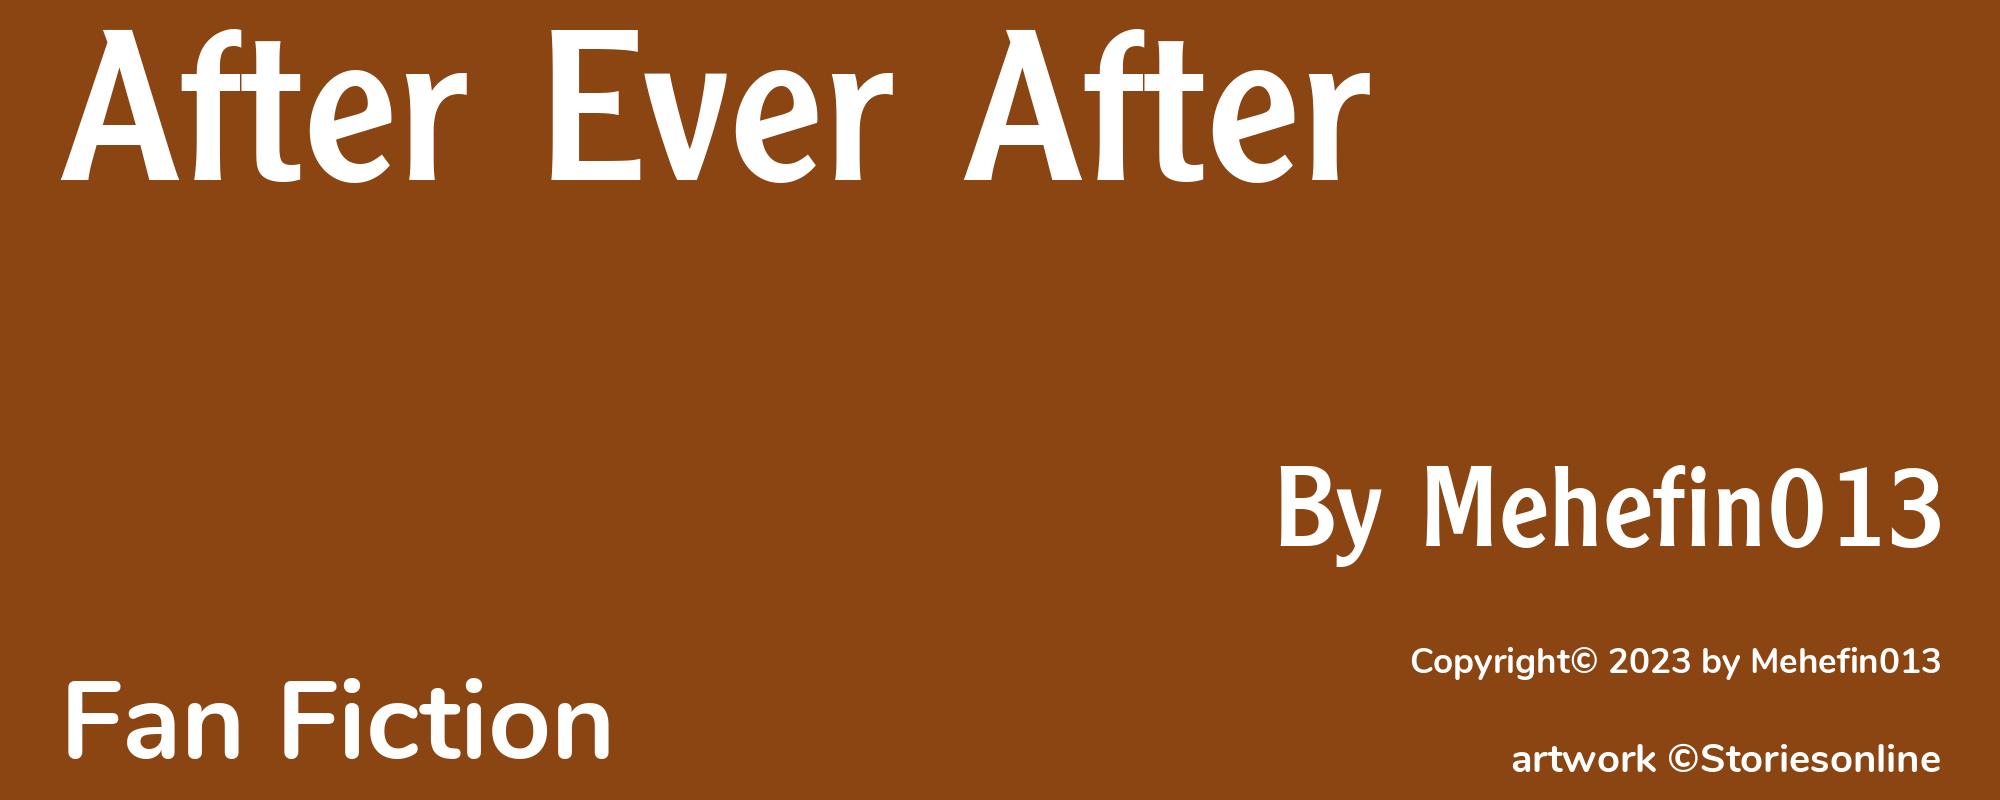 After Ever After - Cover